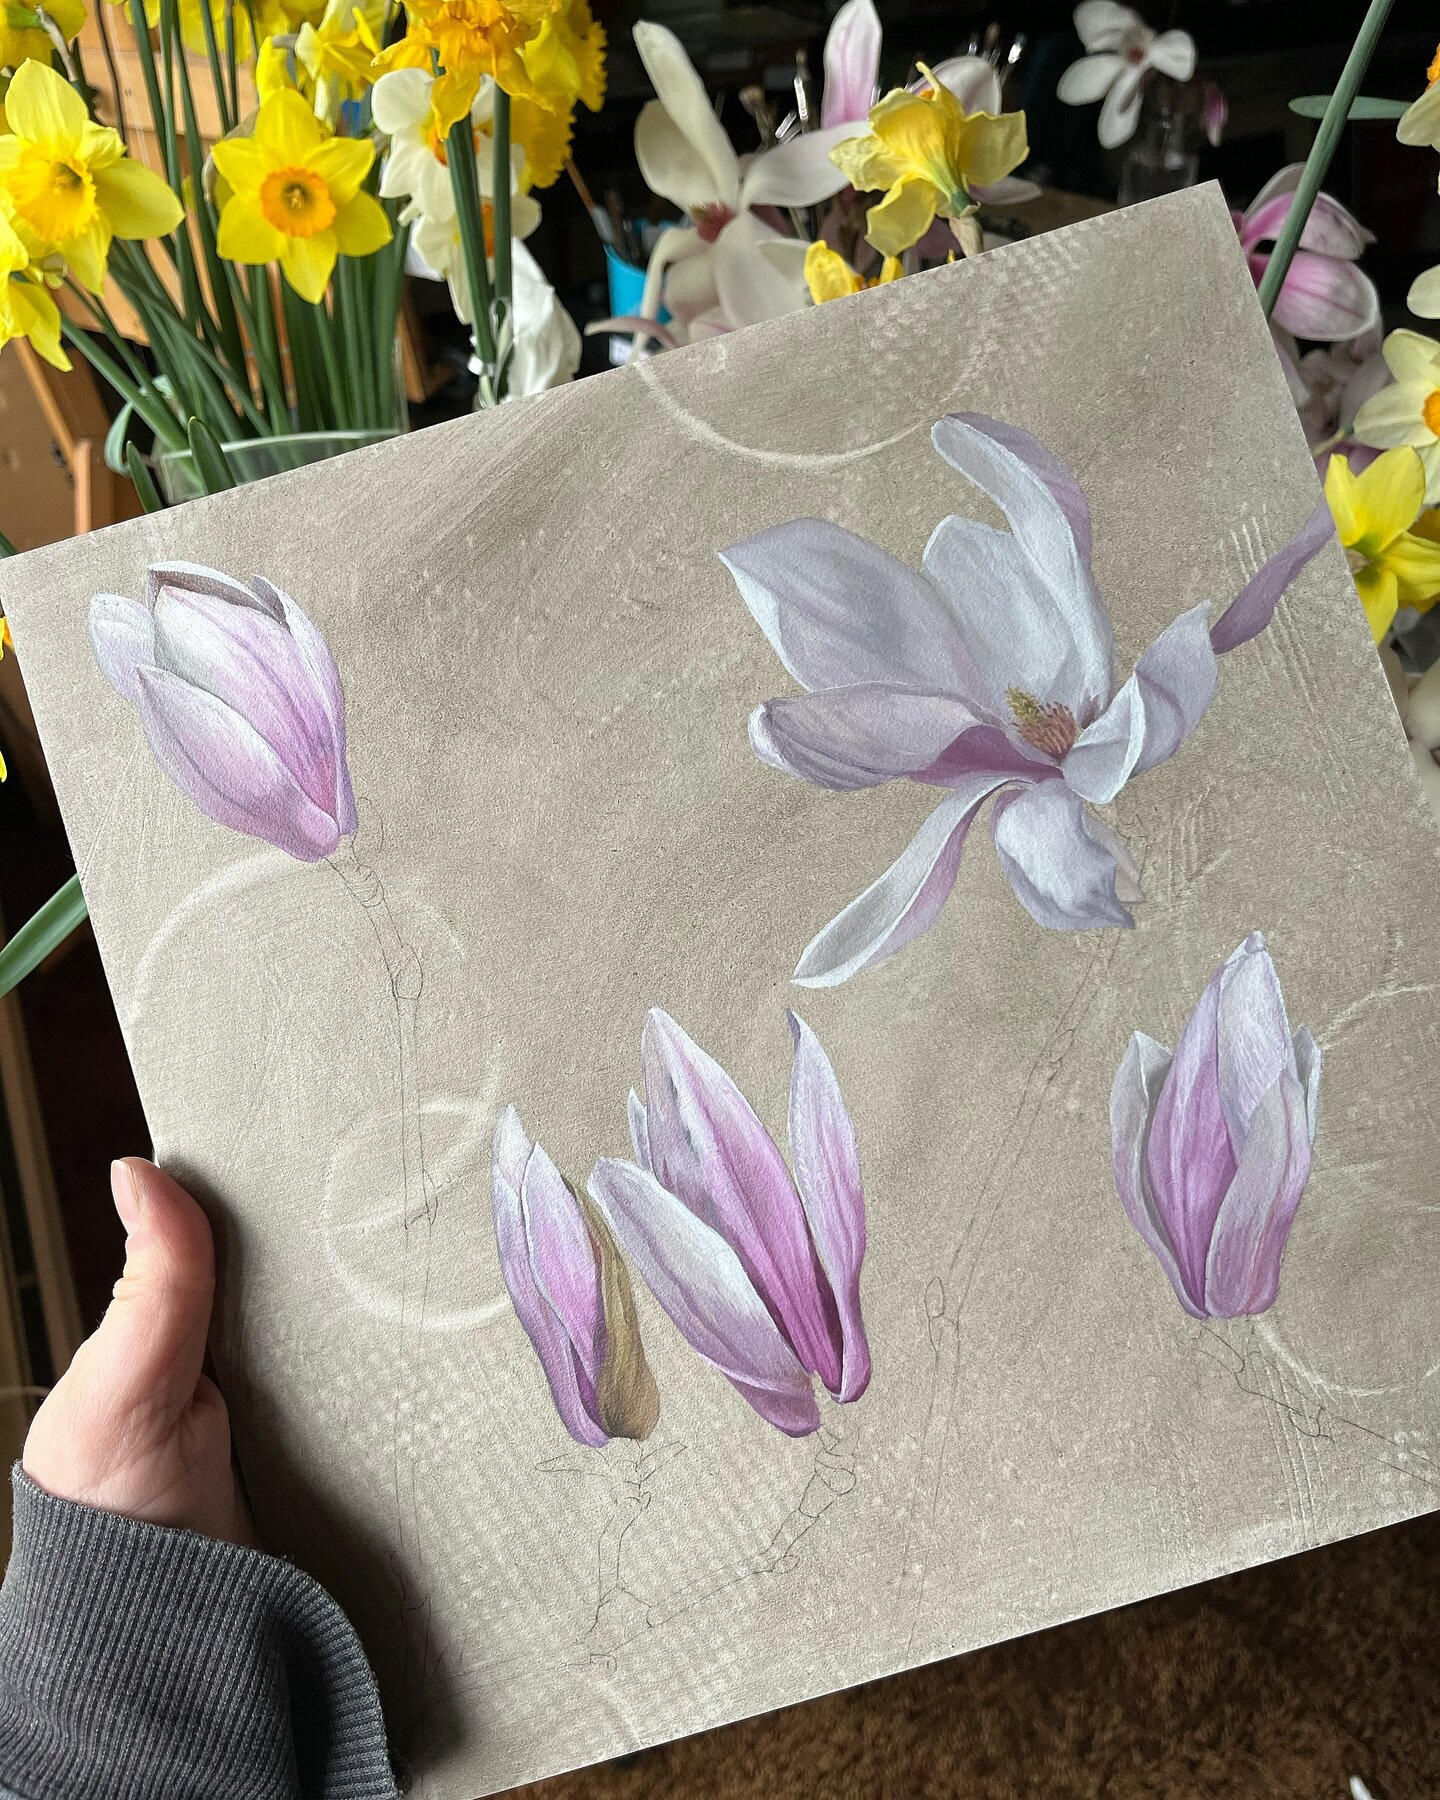 Why can&rsquo;t magnolia trees bloom longer? Right?!?

Their scent is heavenly and they&rsquo;re so beautiful. Hard to choose between painting them or daffodils.

So I chose both and it&rsquo;s brutal trying to work fast enough to capture them both f